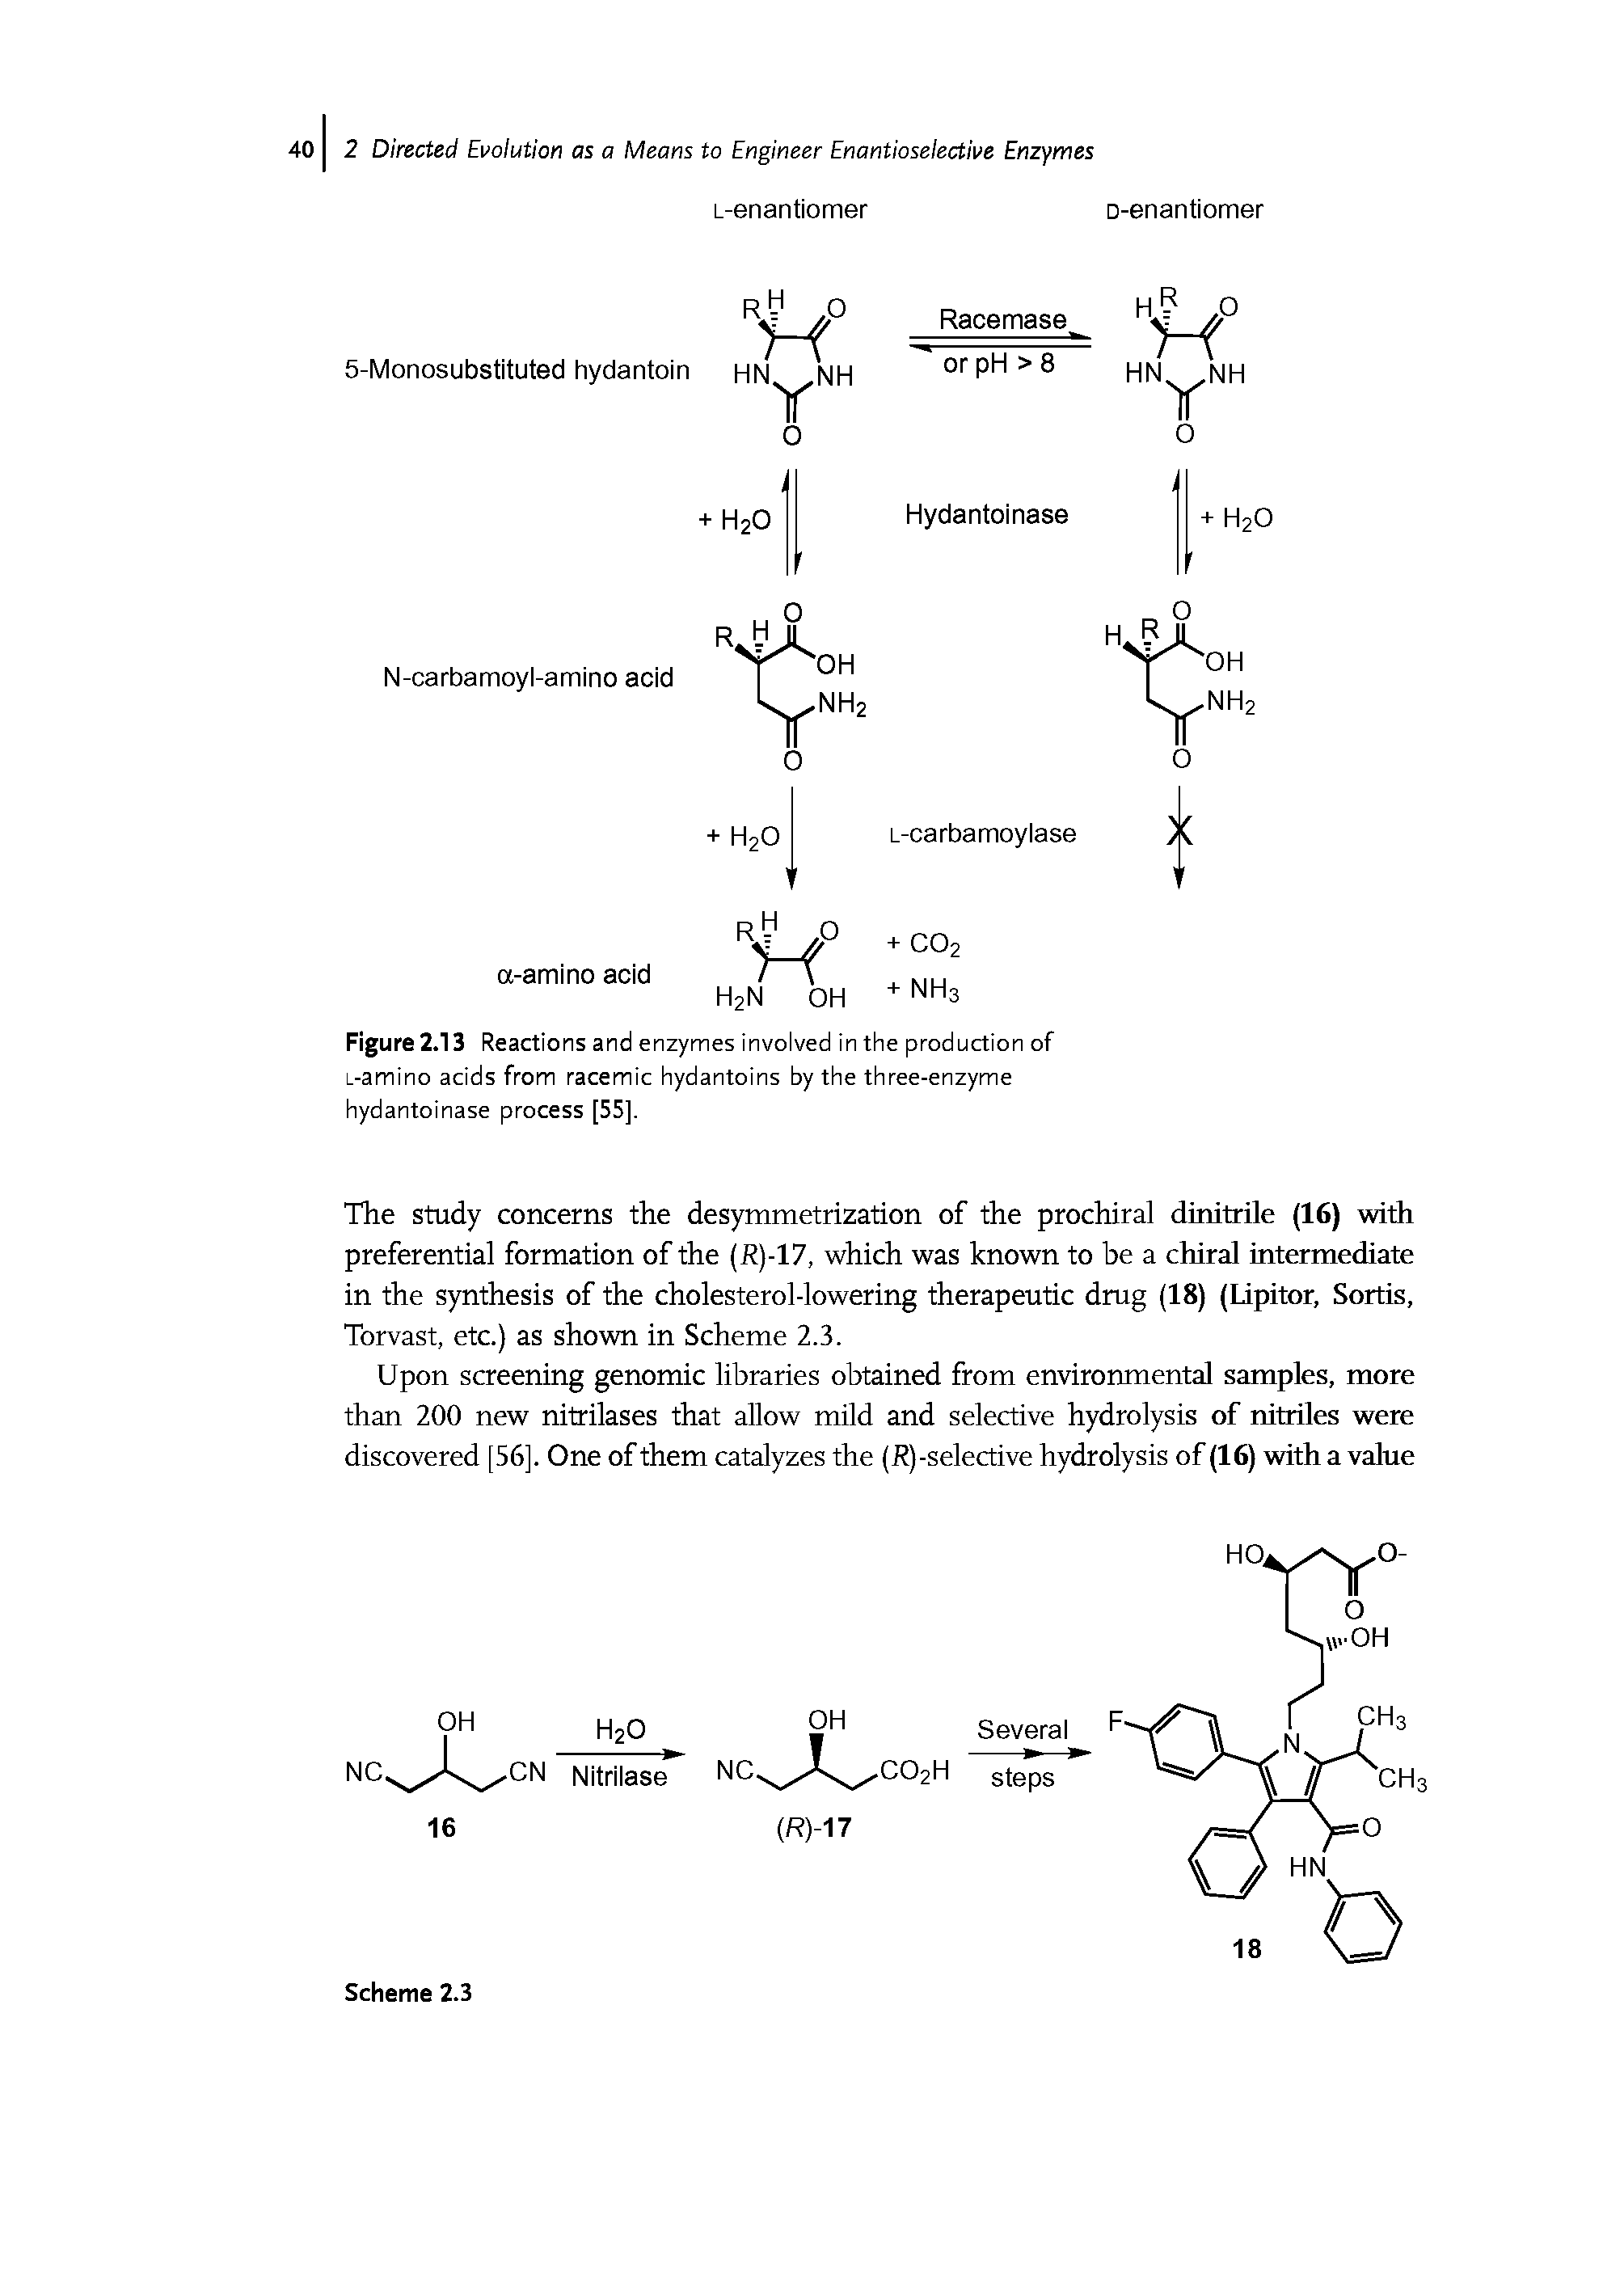 Figure 2.13 Reactions and enzymes involved in the production of L-amino acids from racemic hydantoins by the three-enzyme hydantoinase process [55],...